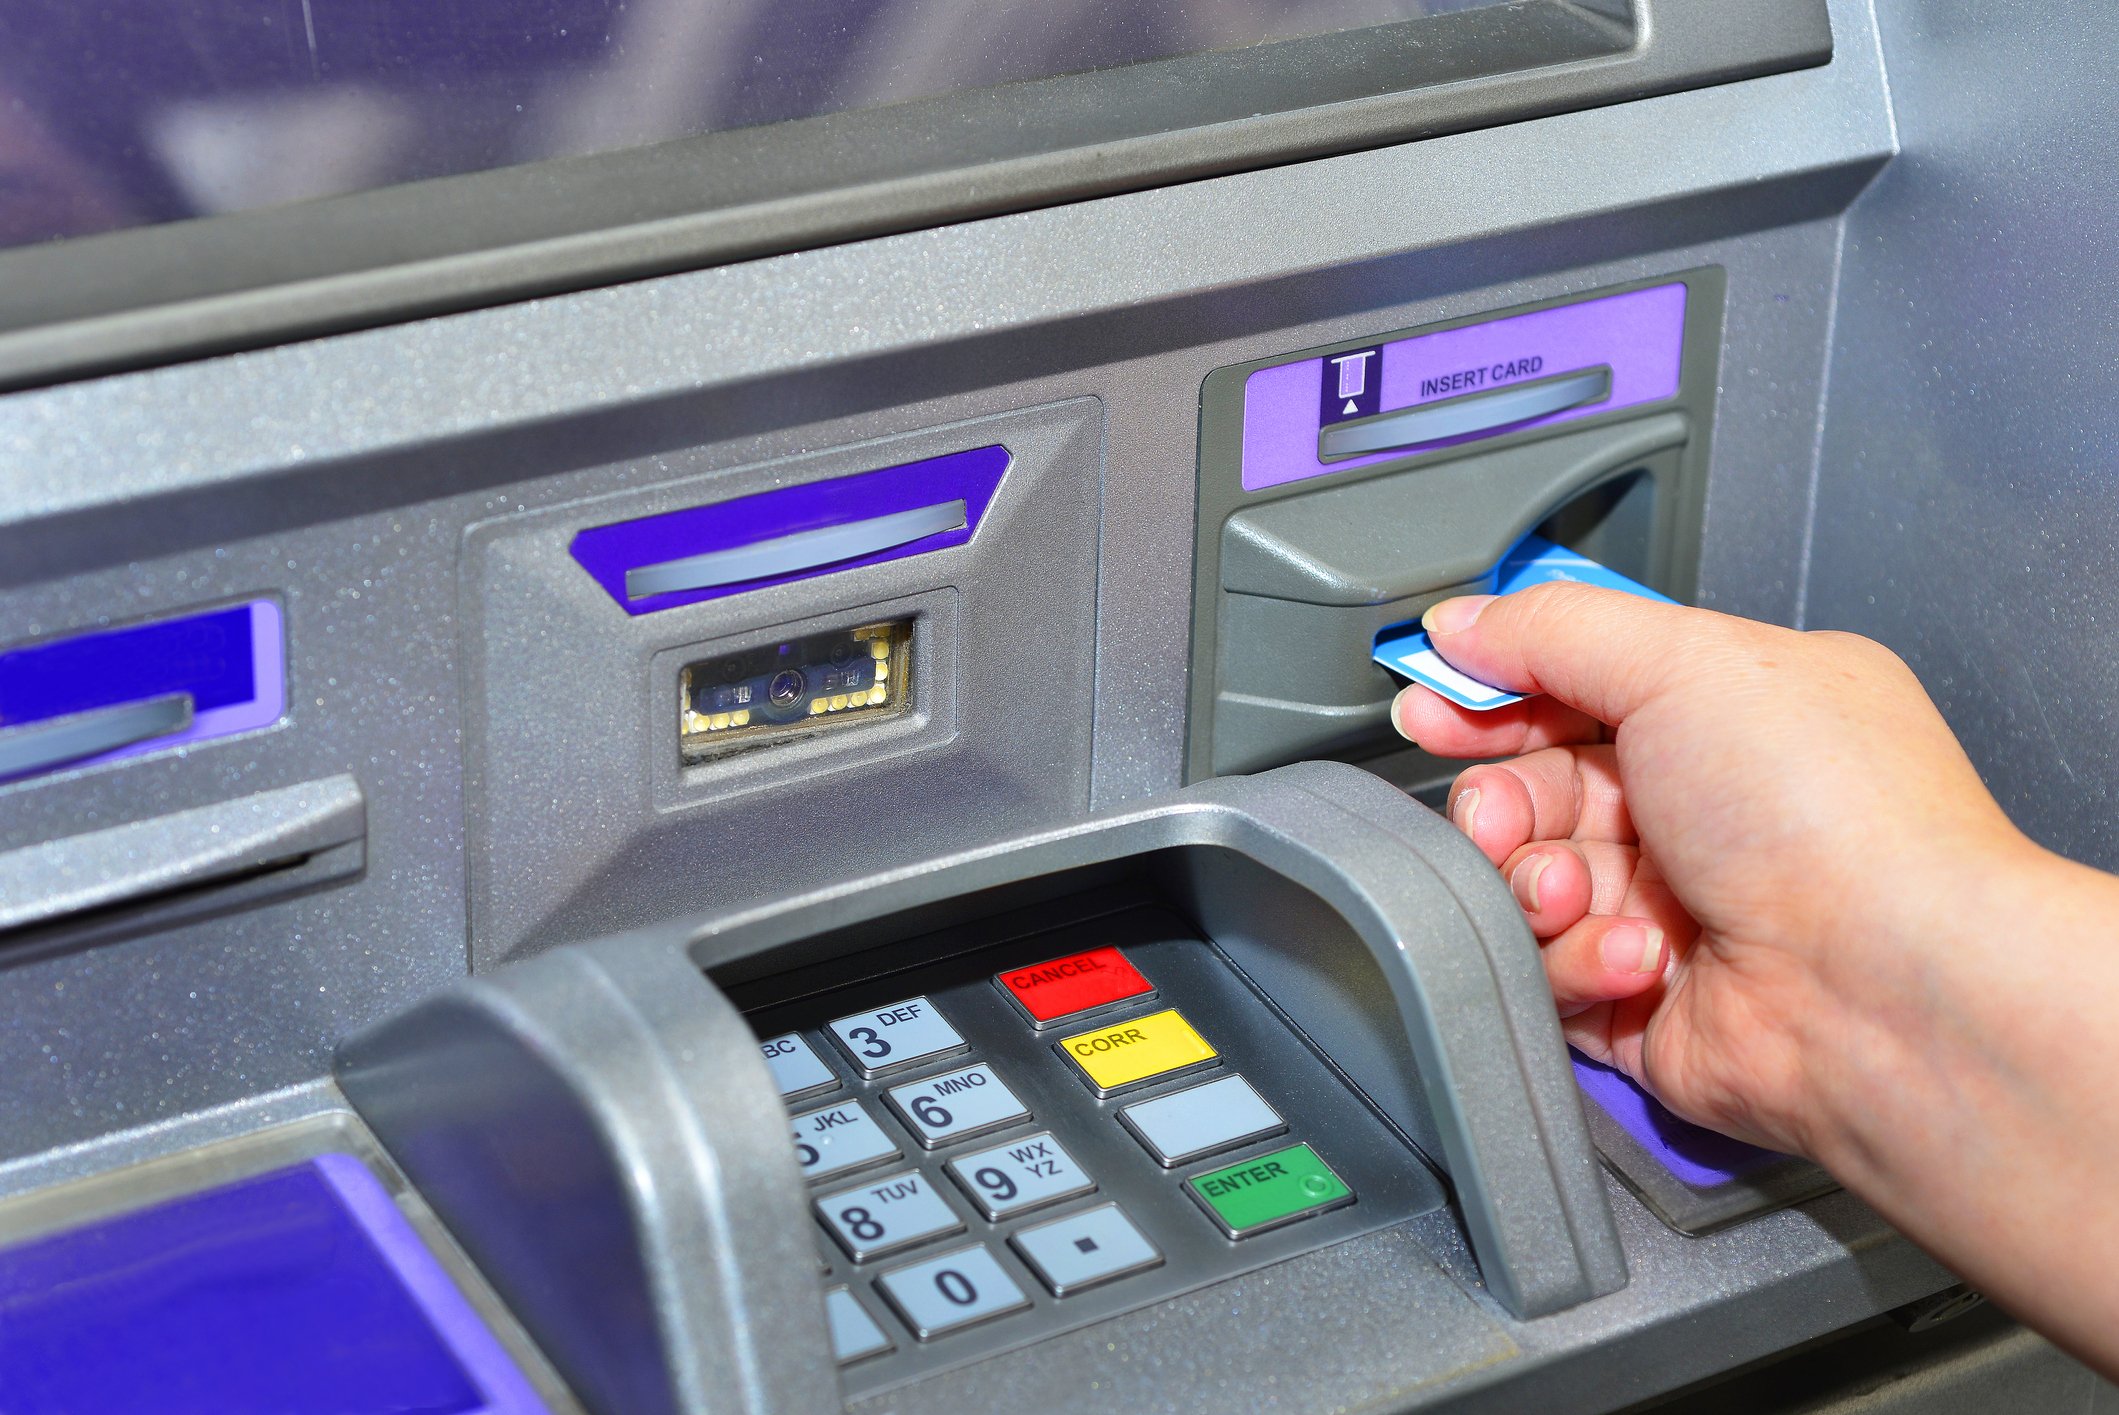 3. "Free Money ATM Codes That Actually Work" - wide 2